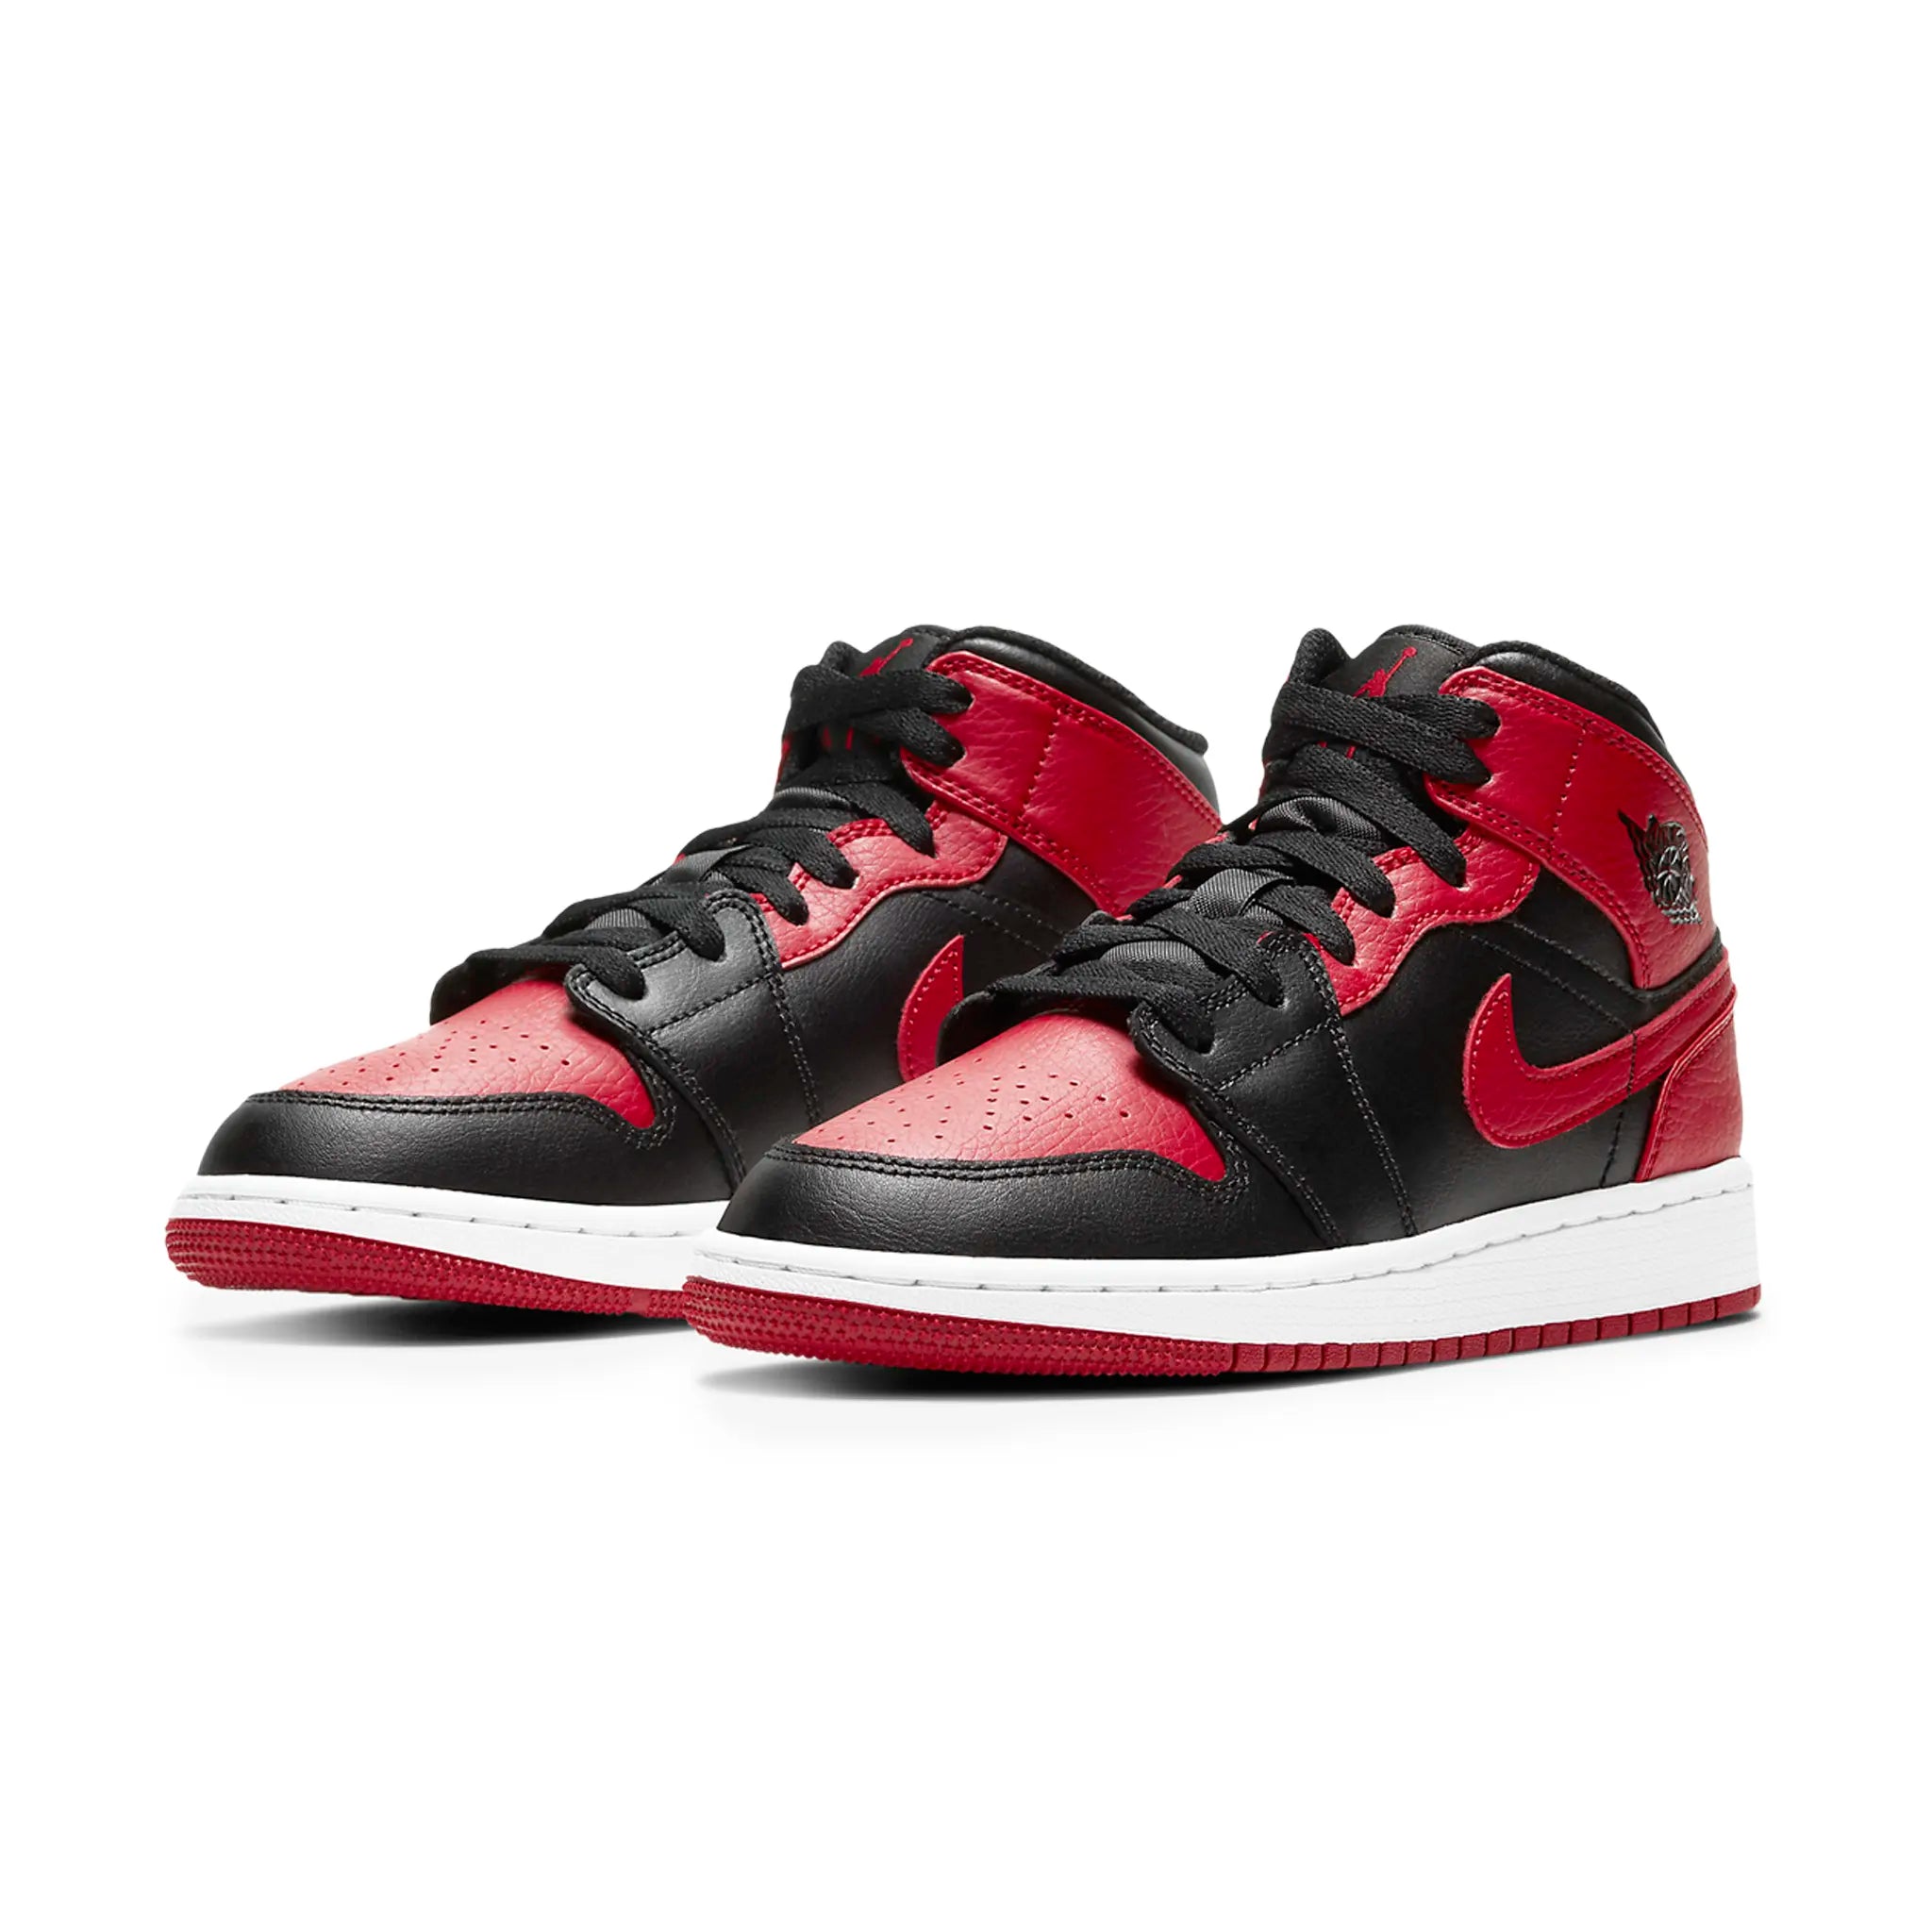 Front side view of Air Jordan 1 Mid Banned (GS) 554725-074